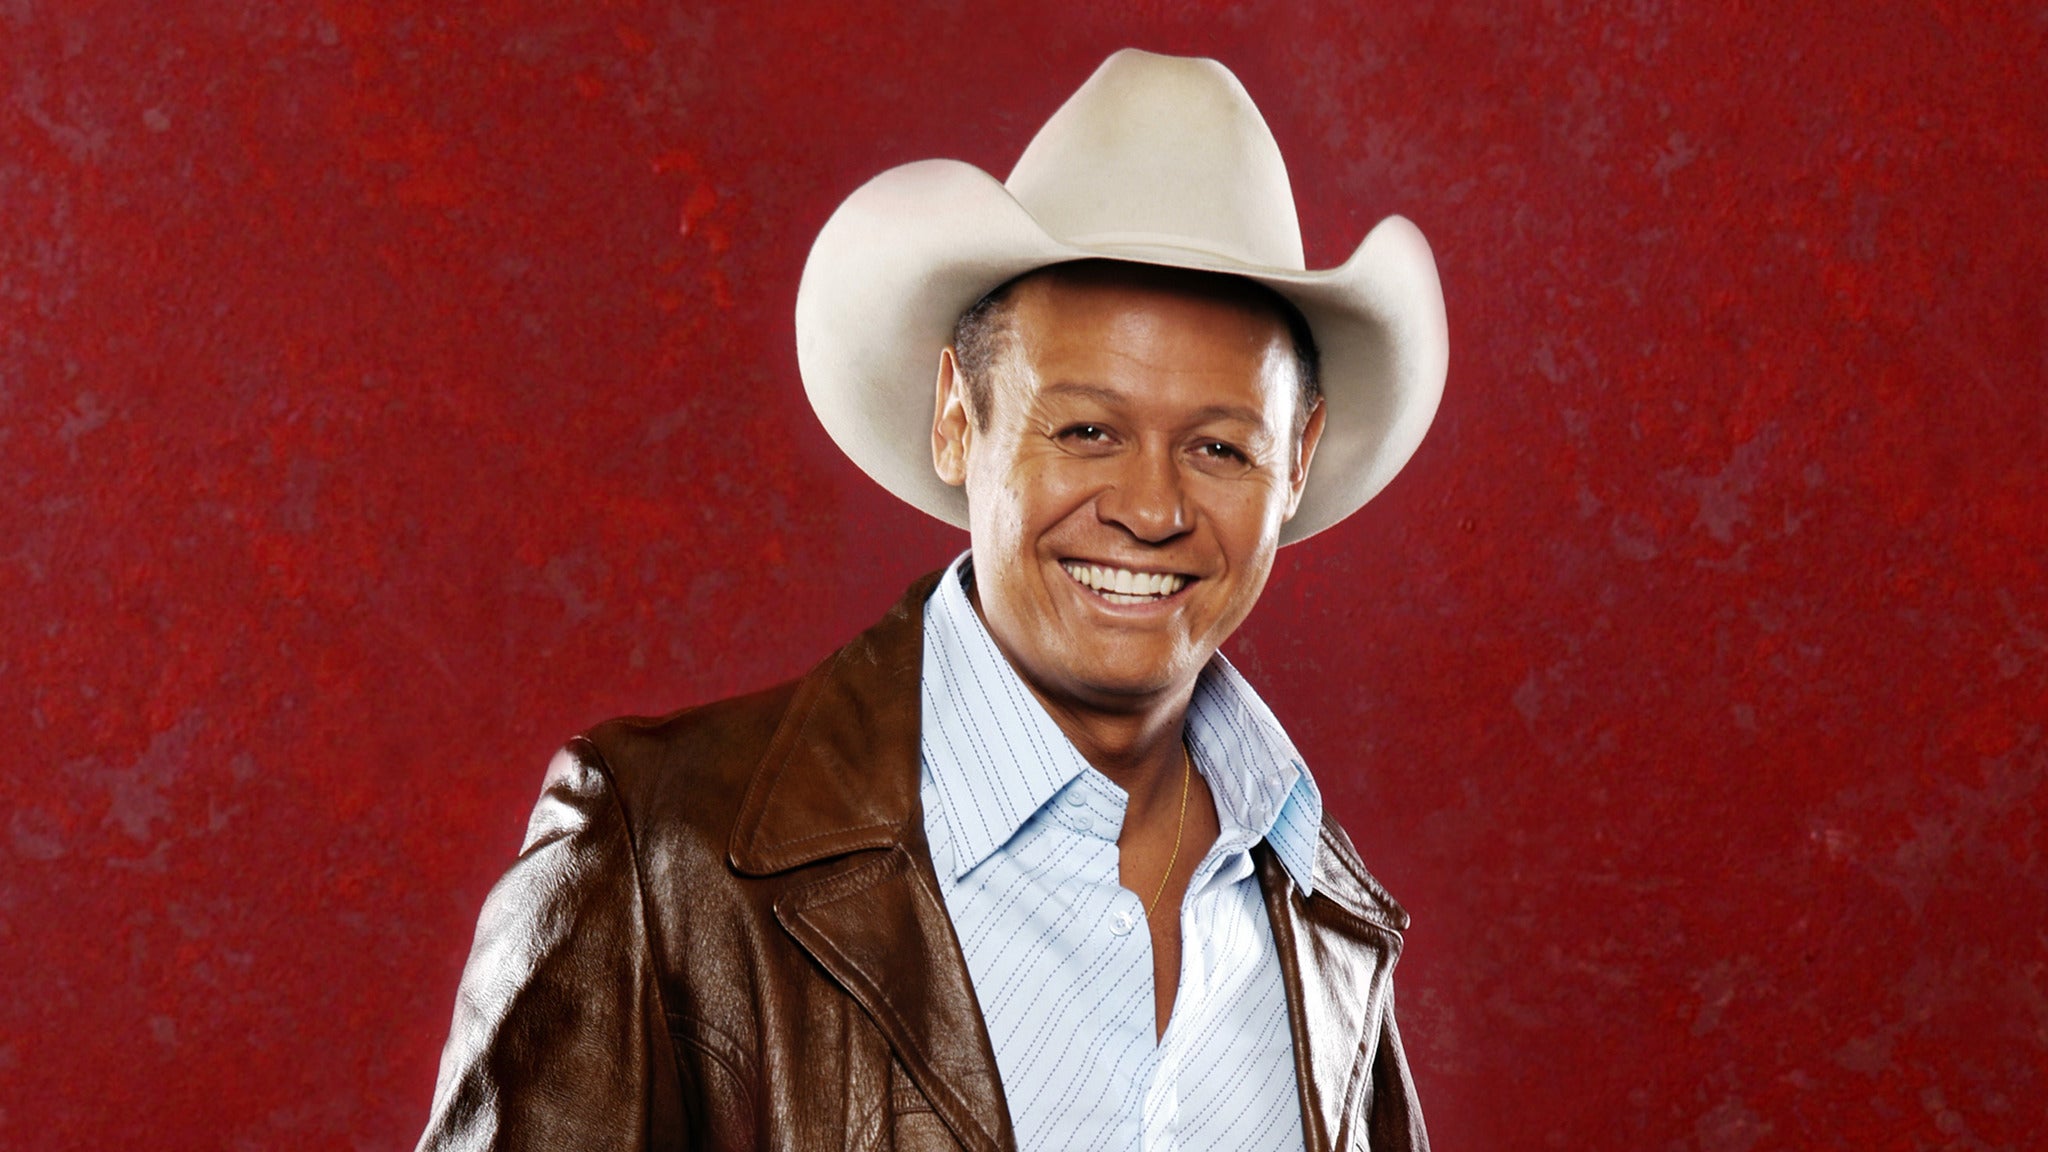 Neal McCoy Tickets, 2021 Concert Tour Dates | Ticketmaster